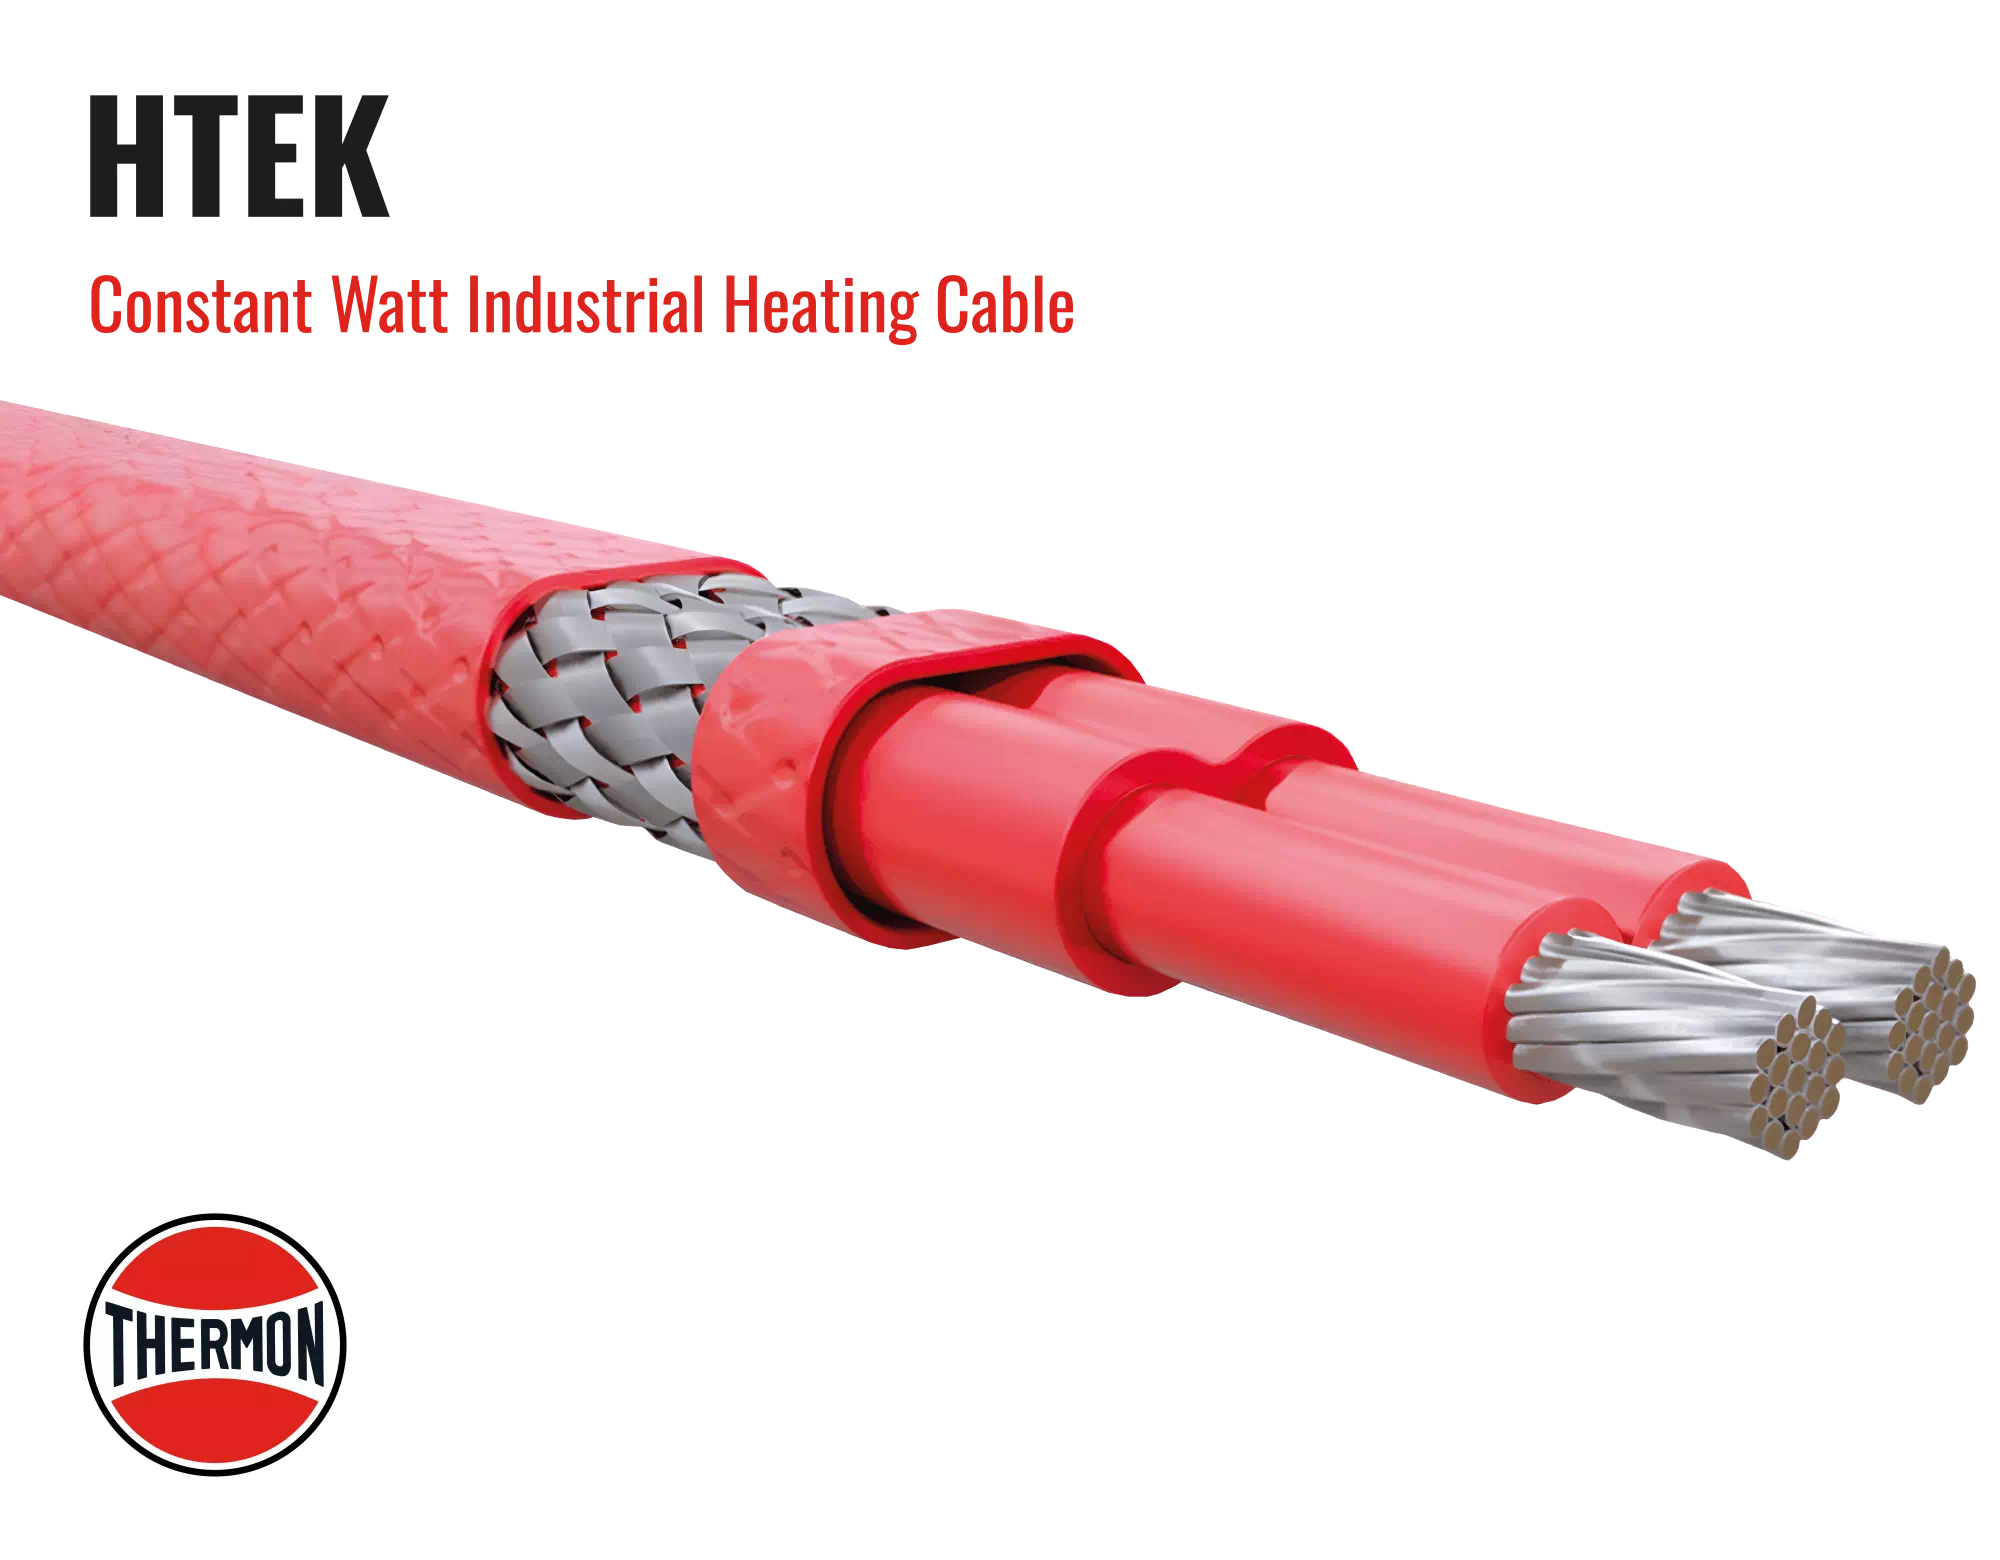 Thermon HTEK-Series-Constant-Watt-Heating-Cable